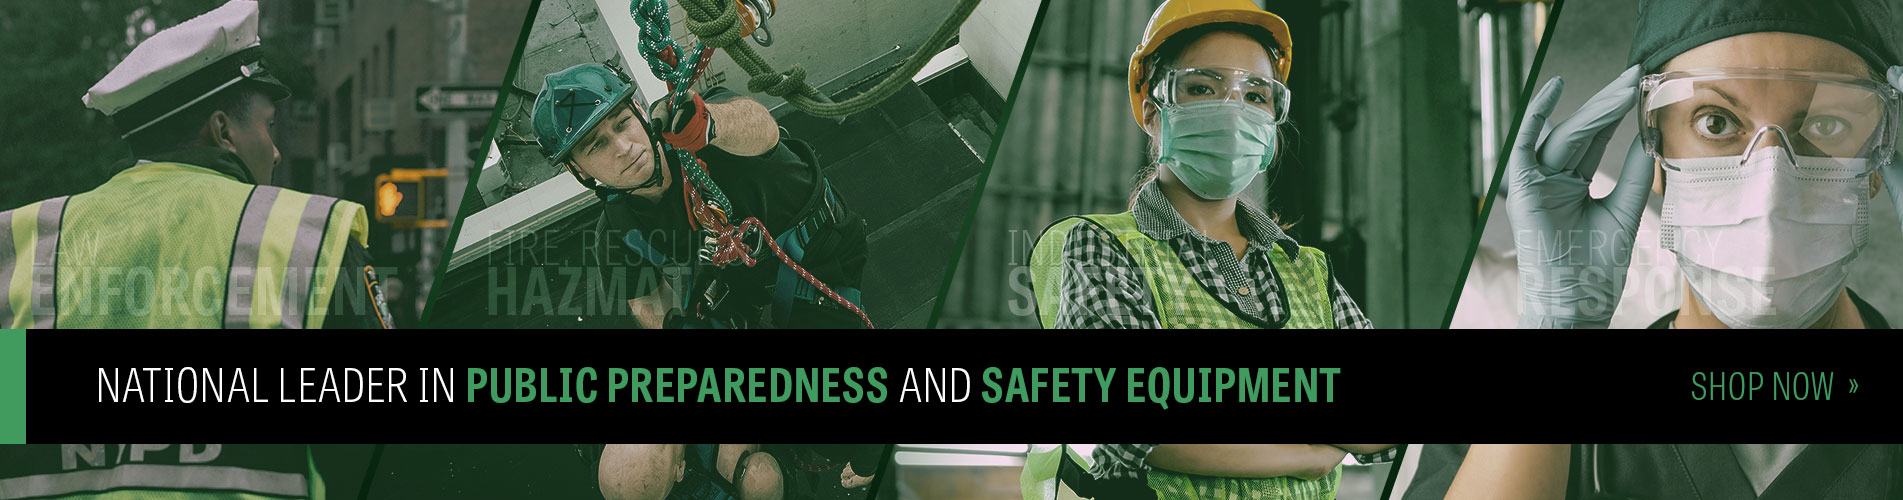 Safeware is a national leader in public preparedness and safety equipment